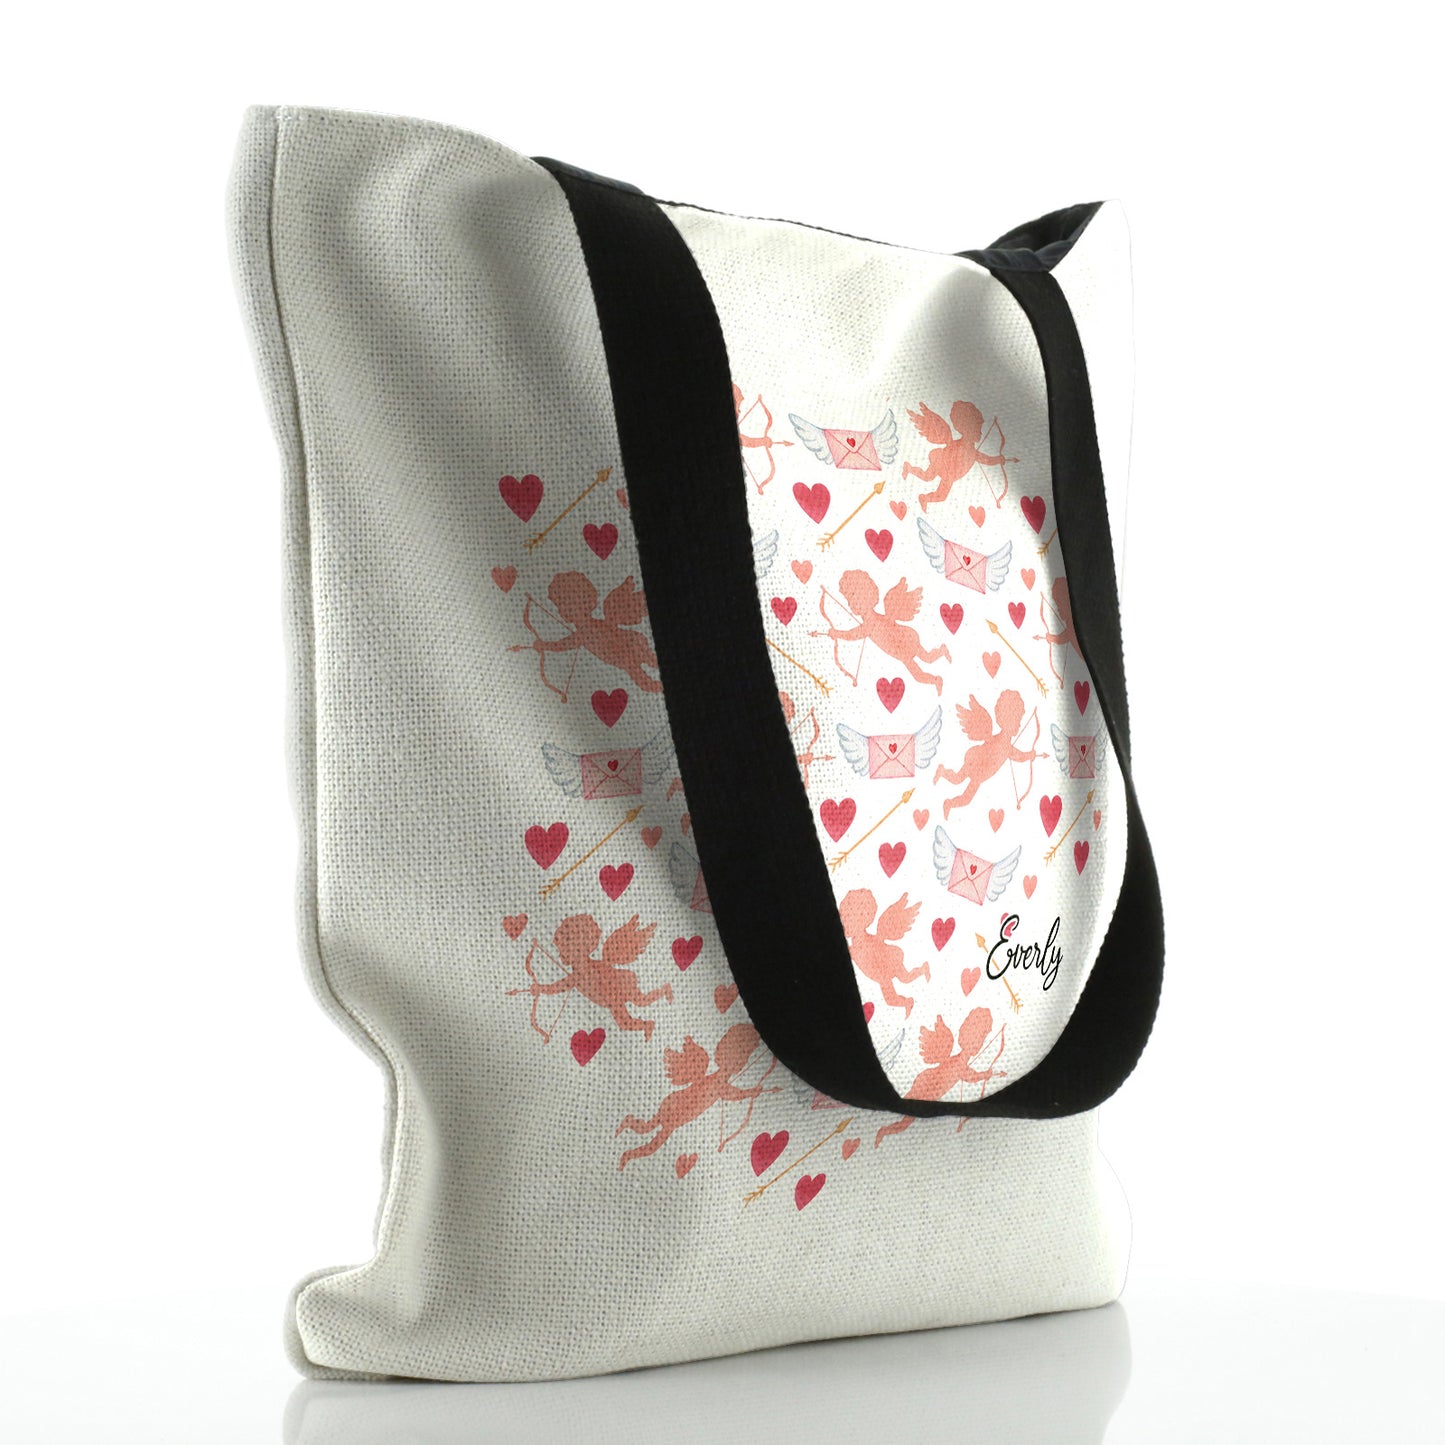 Personalised White Tote Bag with Stylish Text and Cupid Hearts Print